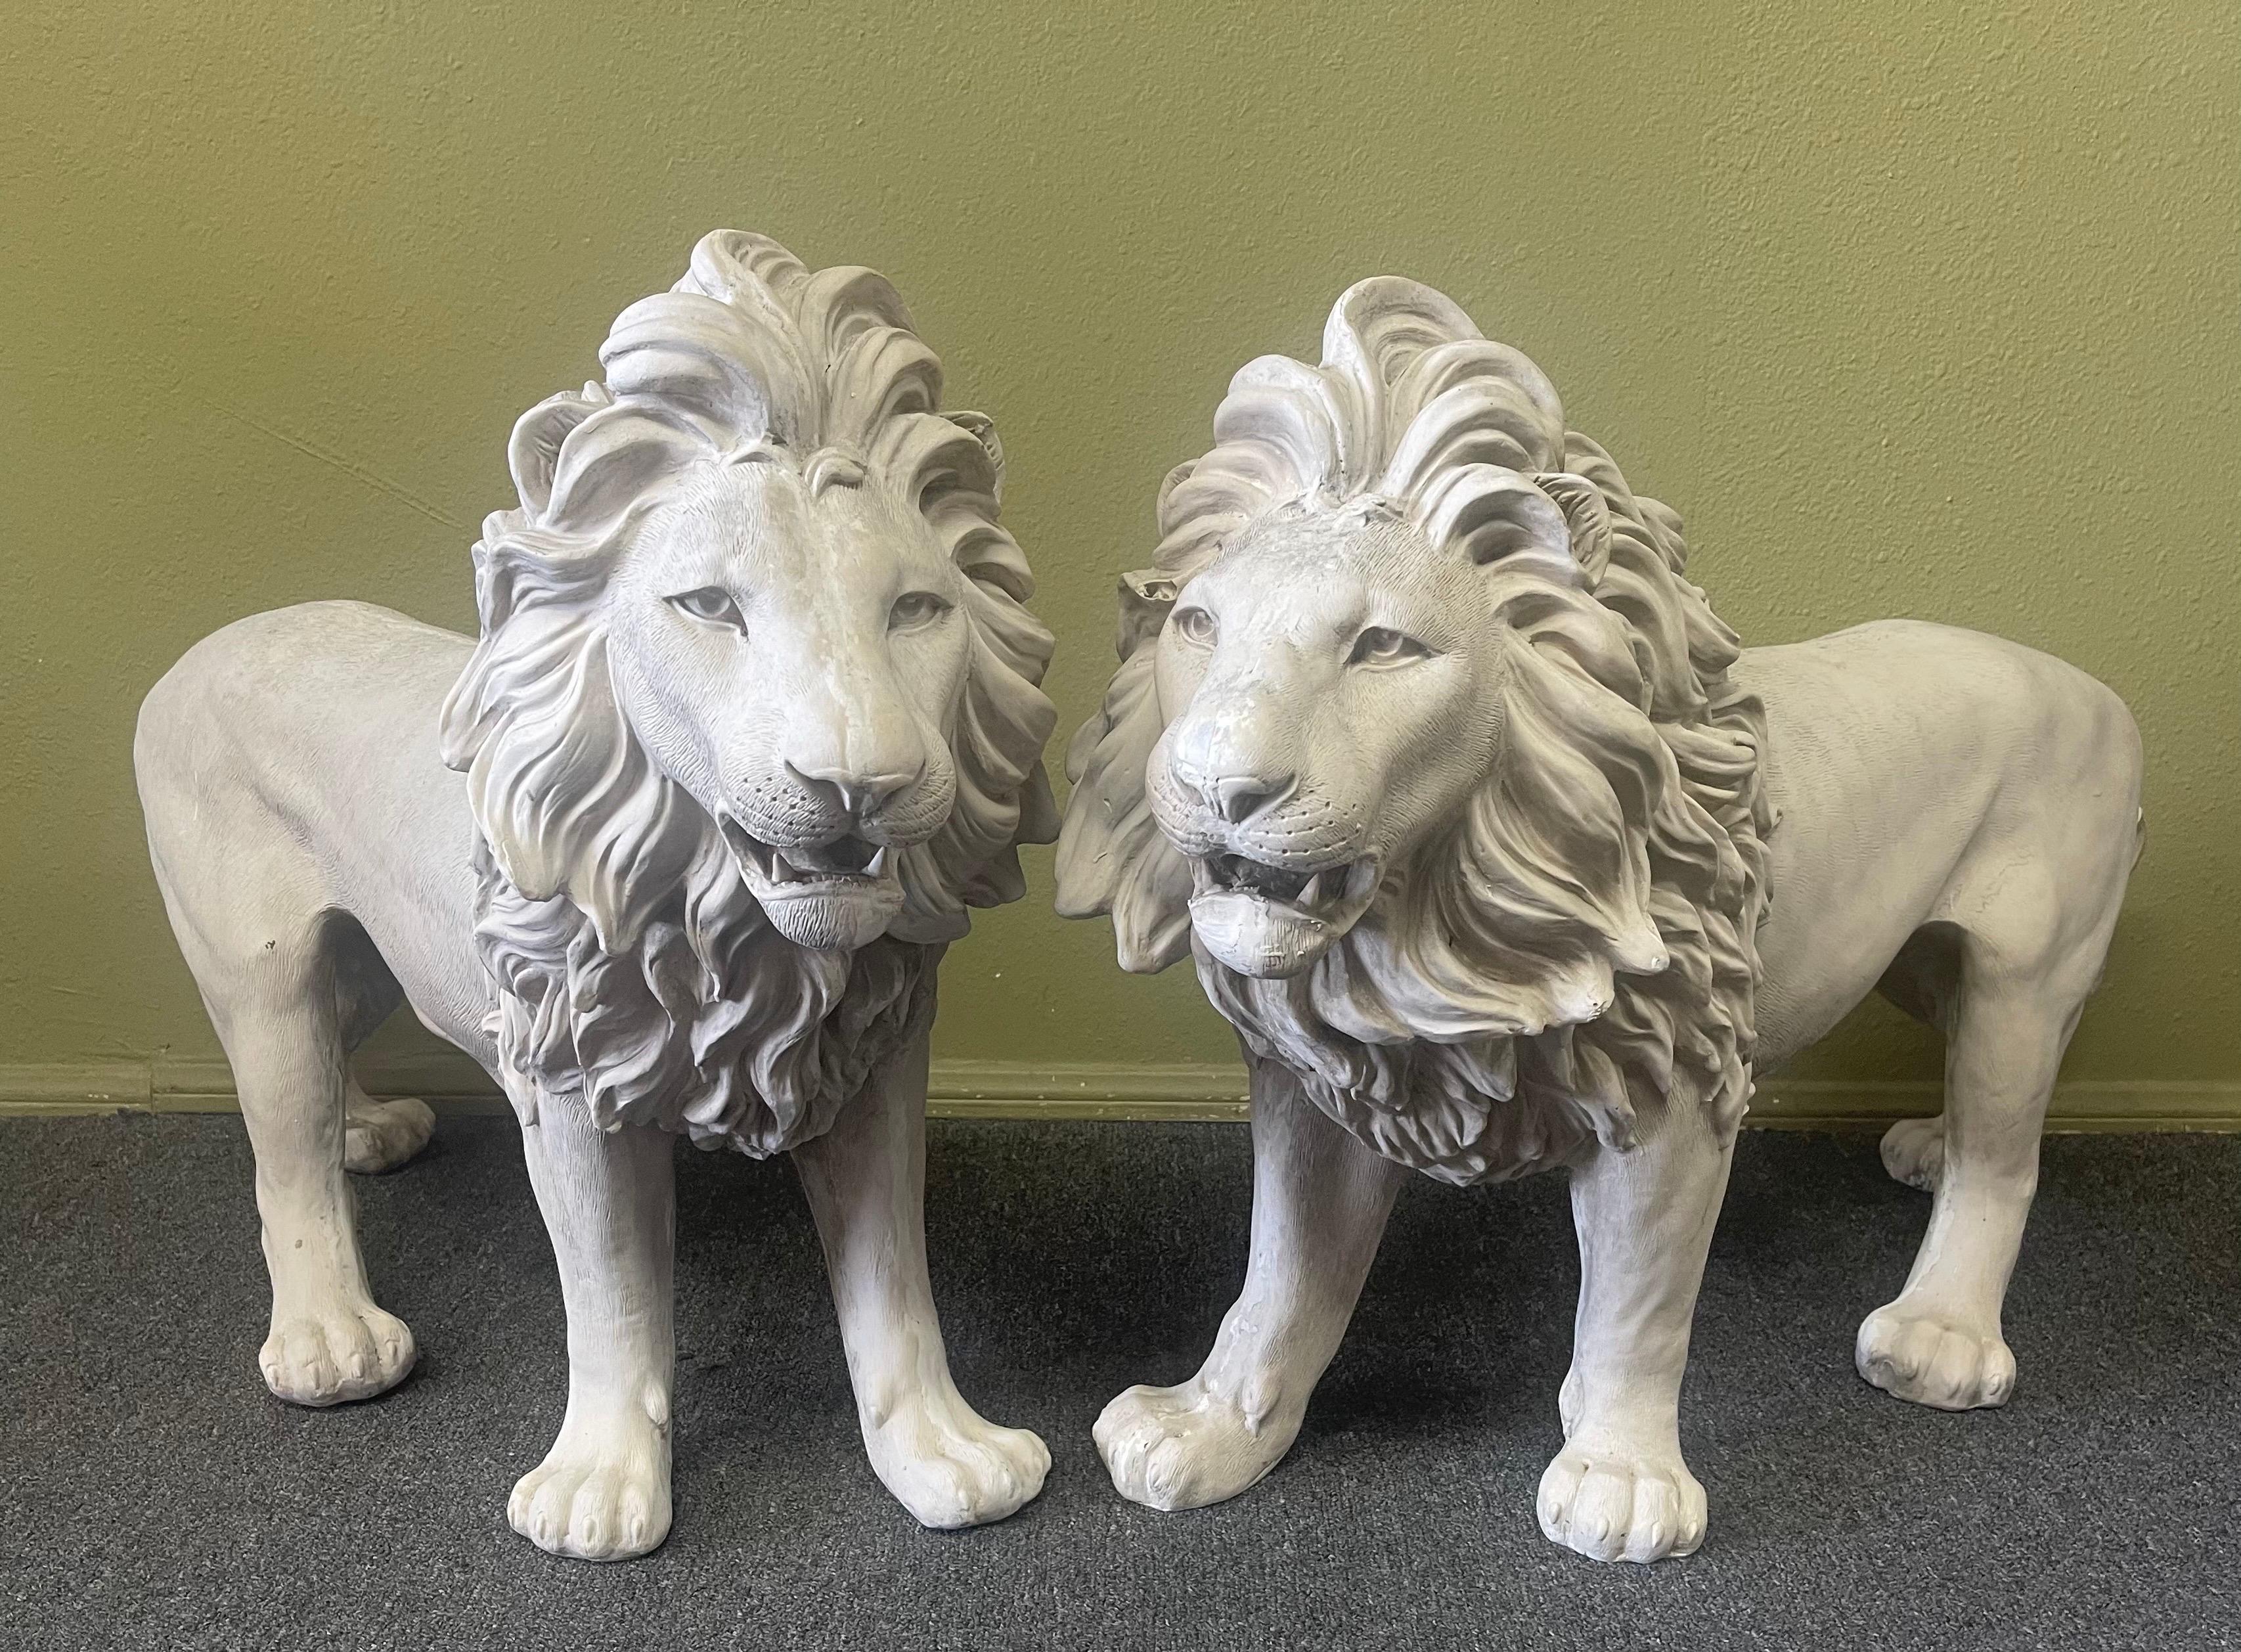 Super cool and hard to find vintage pair of large fiberglass lions, circa 1980s. The pair look like cast cement, but are made of lightweight and durable fiberglass; they are in good vintage condition with a weathered patina and nice detail. The